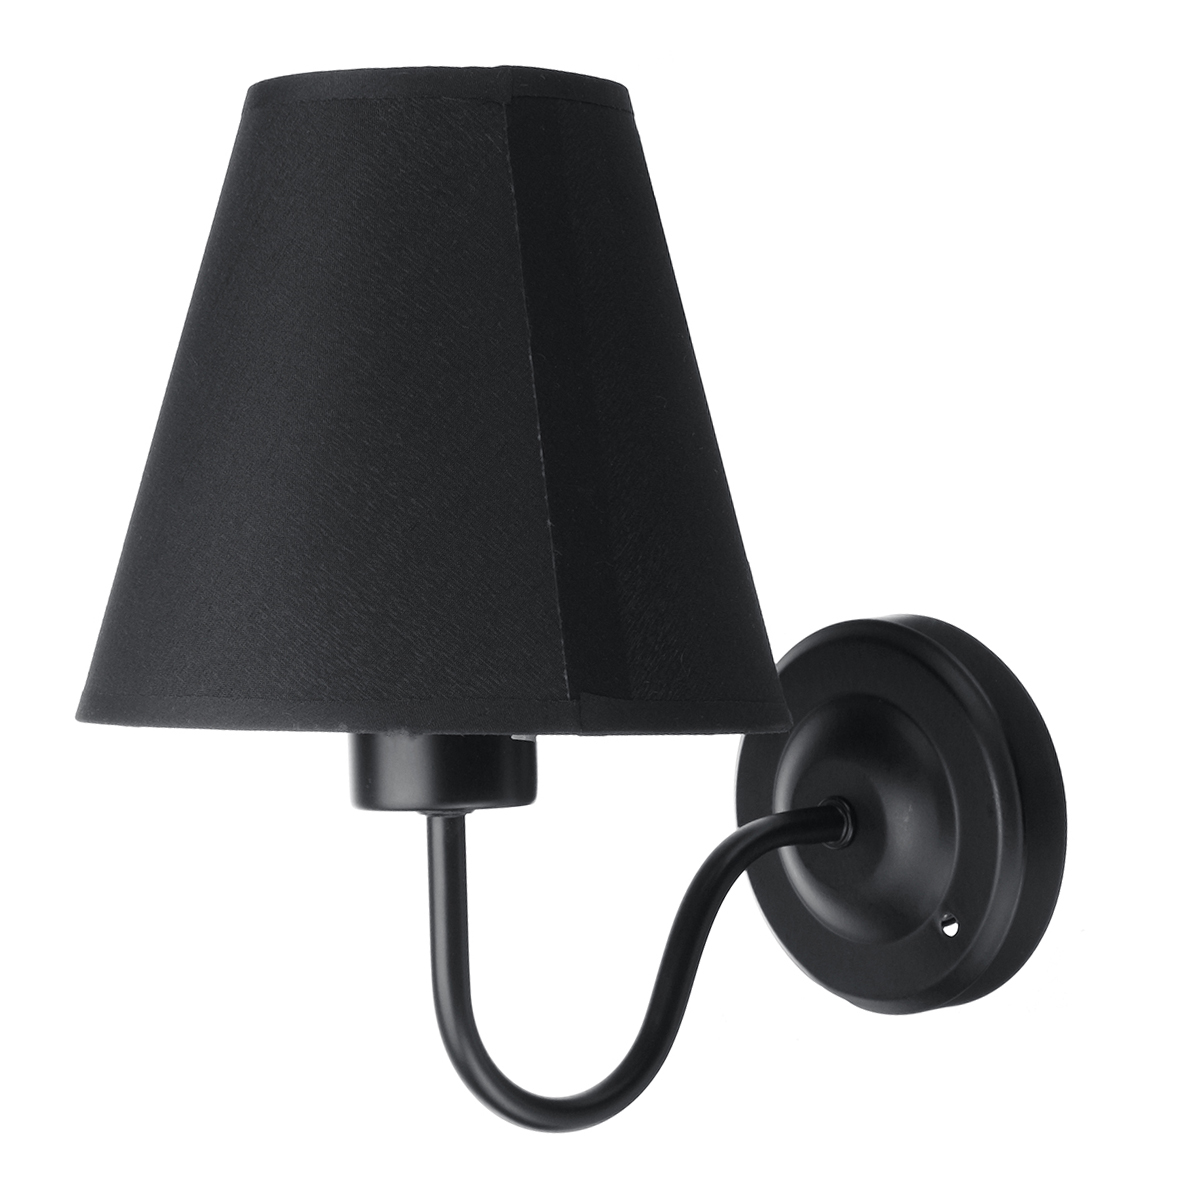 Vintage-Wall-Light-American-Style-Bedroom-Wrought-Iron-Retro-Bedside-Lamp-with-Power-Switch-Cord-Wit-1809575-7